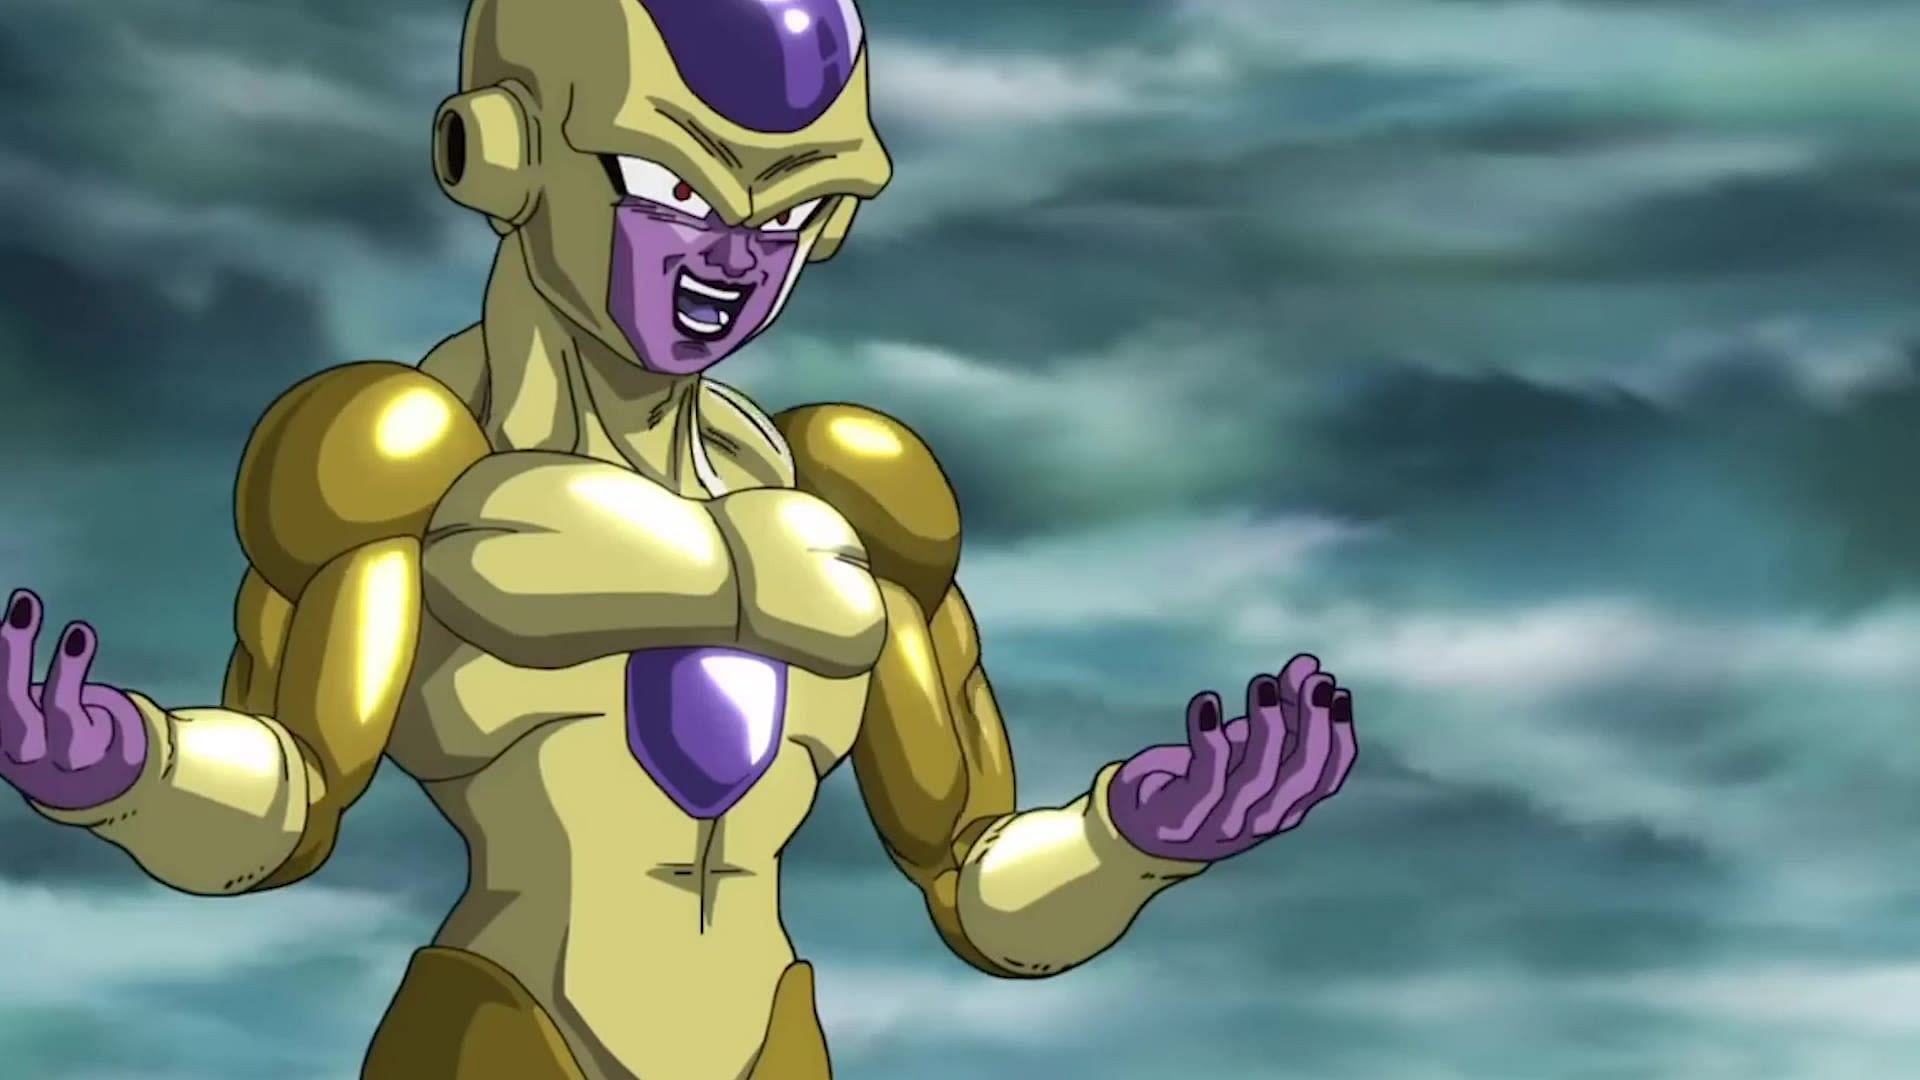 Frieza as seen in the Super anime (Image via Toei Animation)